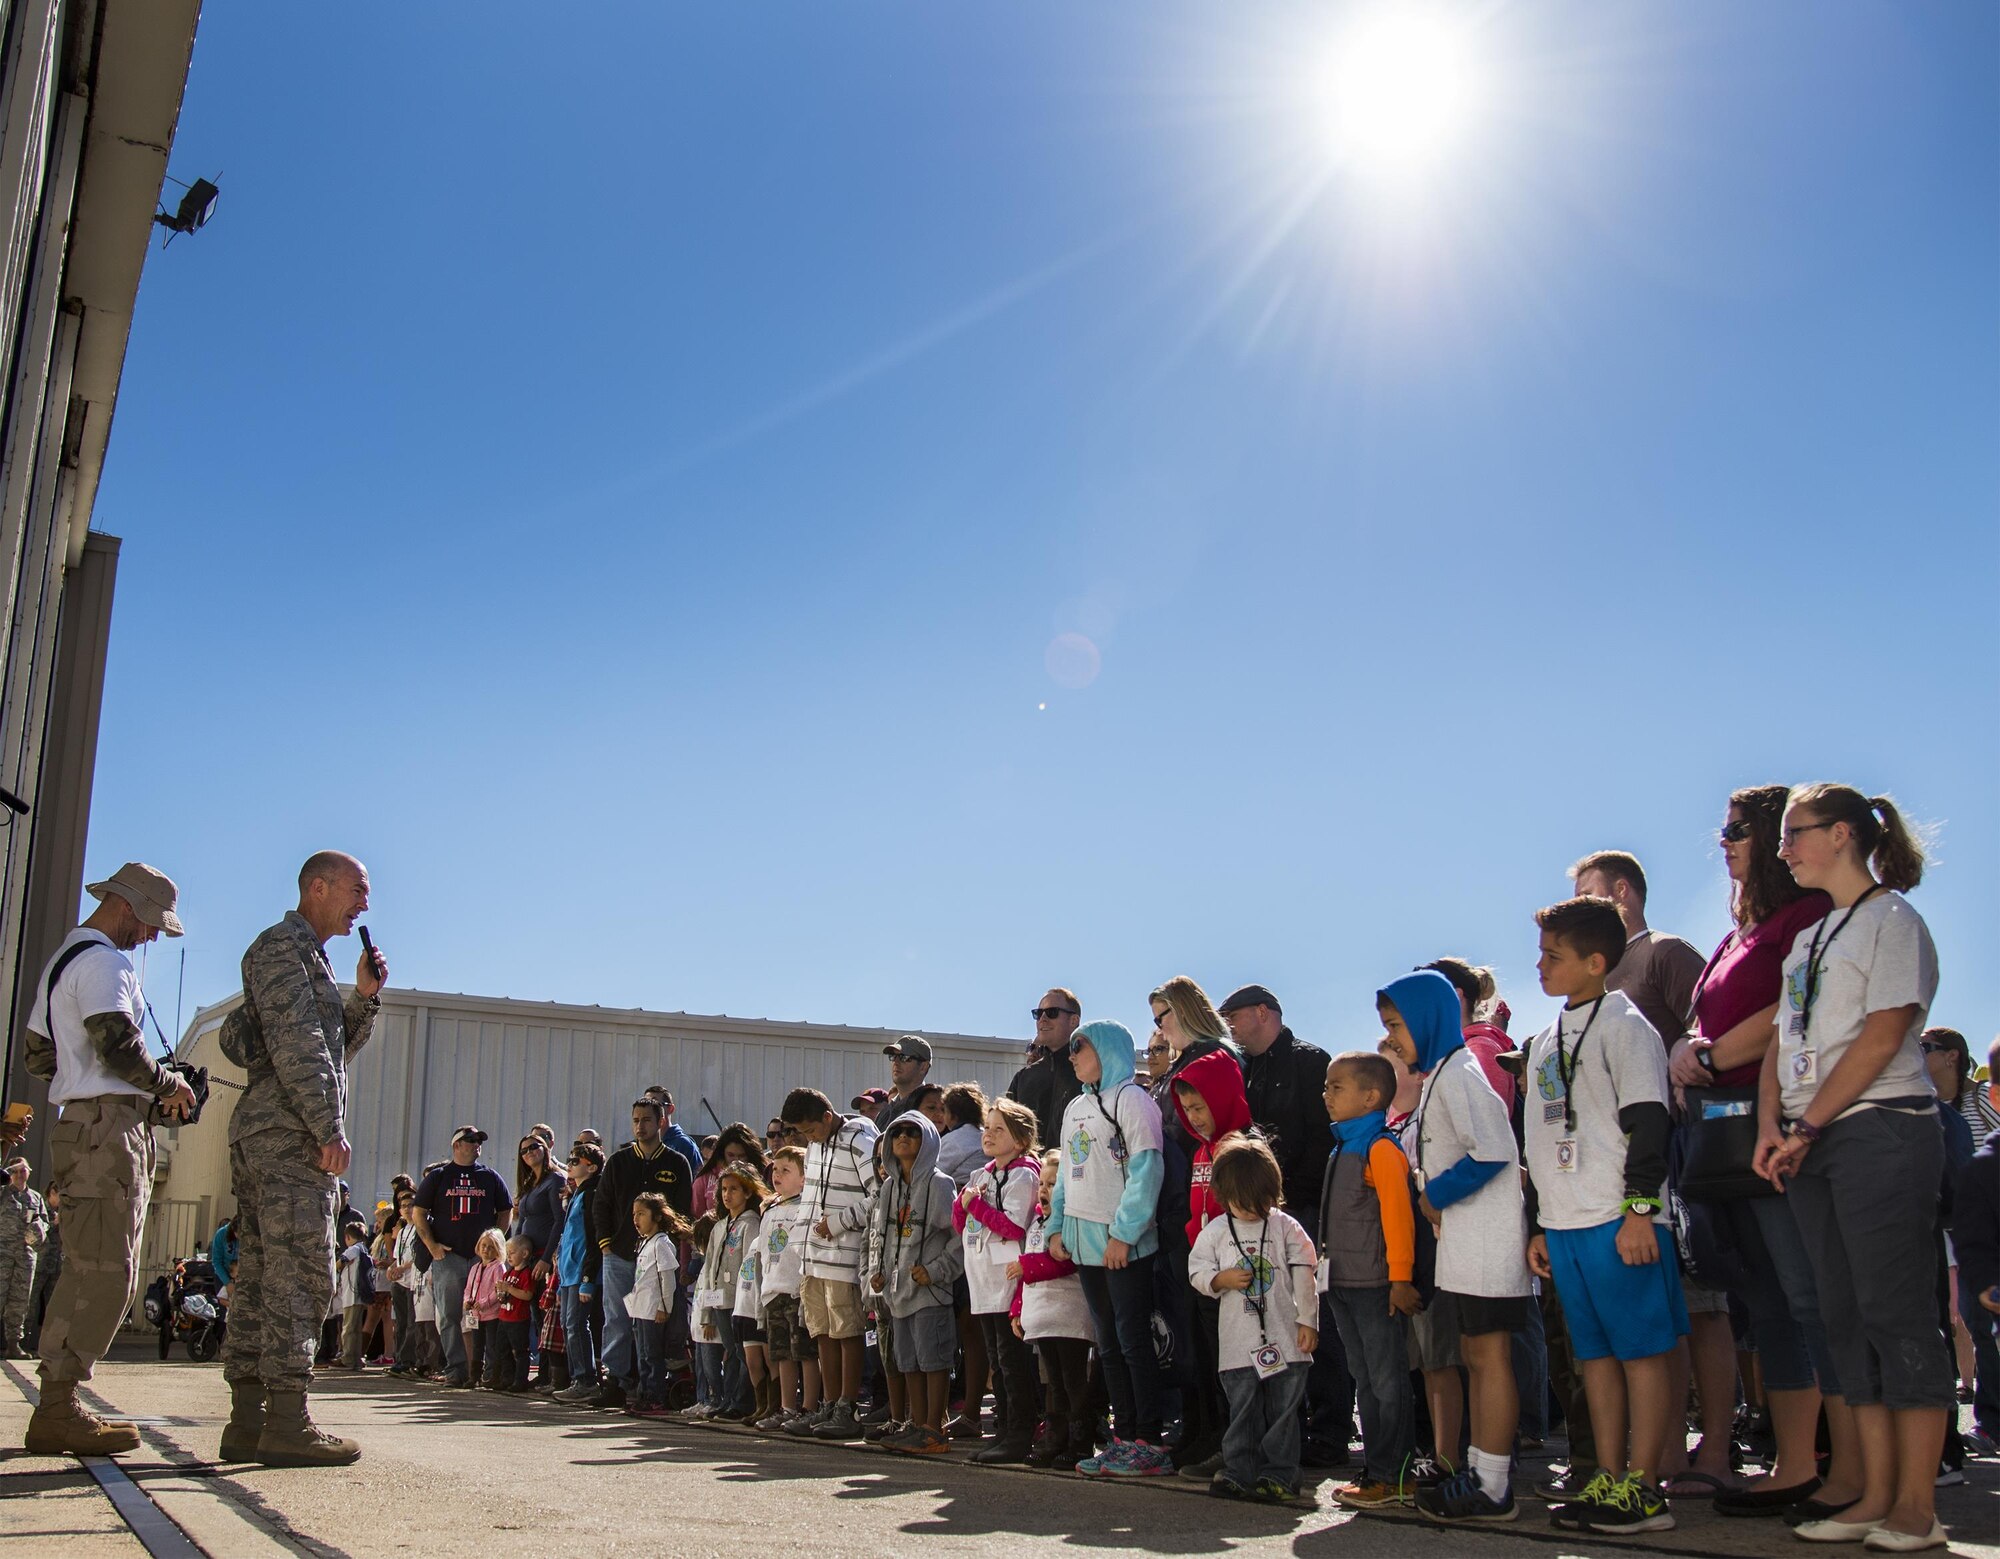 Brig. Gen. Christopher Azzano, 96th Test Wing commander, briefs the troops before sending them into the “deployed” environment at the Operation Hero event Oct. 22 at Eglin Air Force Base, Fla.  More than 100 kids participated in the mock deployment experience created to give military children a glimpse of what their loved ones go through when they leave home. The kids went through a deployment line to get their dog tags and “immunizations” before they were briefed by the commander and shipped off to a deployed location. There, they participated in various activities and demonstrations by local base agencies. (U.S. Air Force photo/Samuel King Jr.)